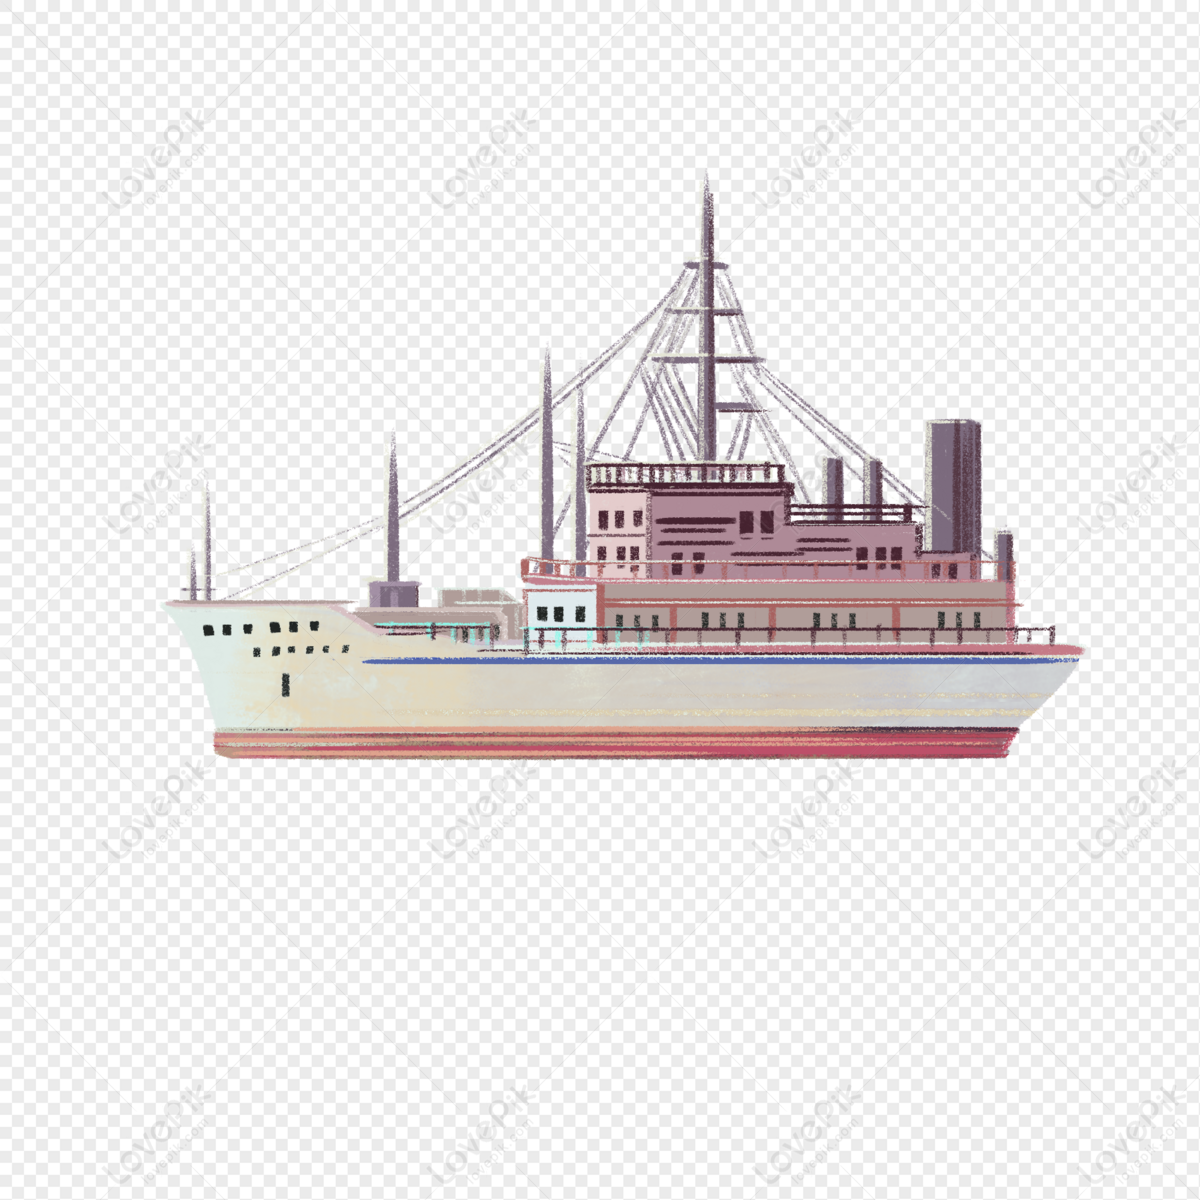 Cartoon Ship PNG Hd Transparent Image And Clipart Image For Free Download -  Lovepik | 401437144